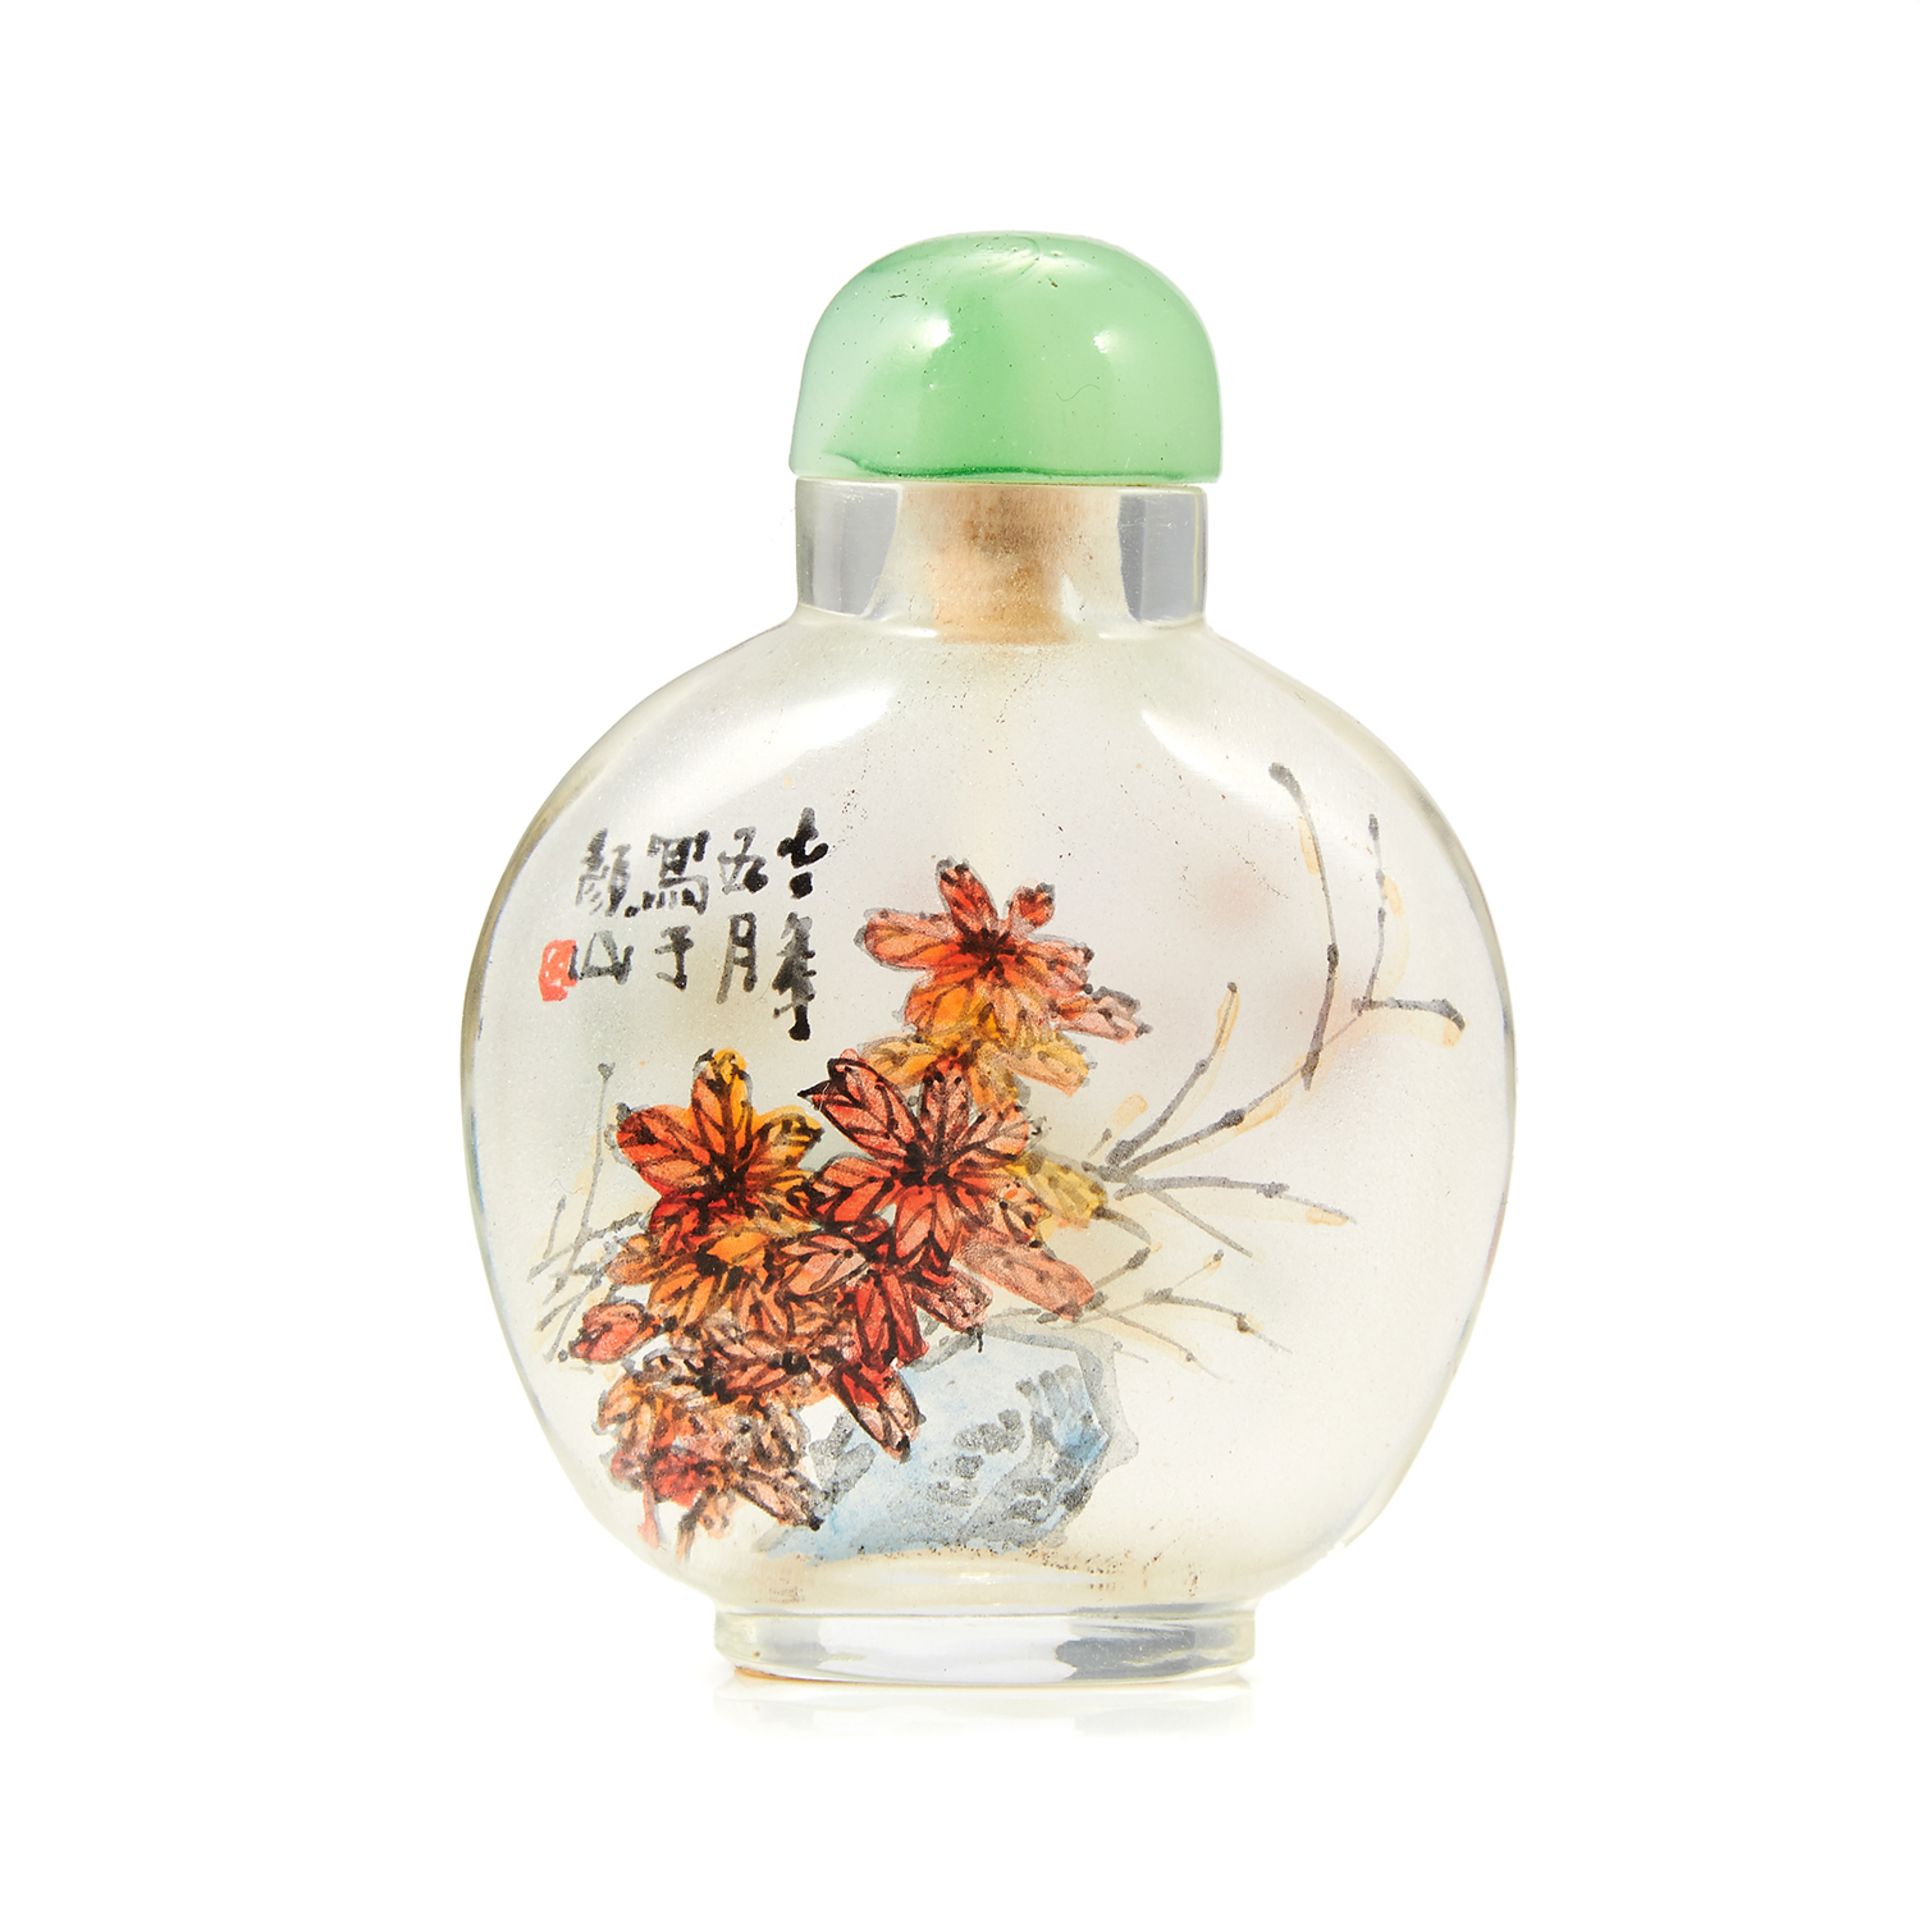 AN ANTIQUE CHINESE PAINTED GLASS SNUFF BOTTLE, CIRCA 1920 with painted scenes of flowers, 6.7cm.